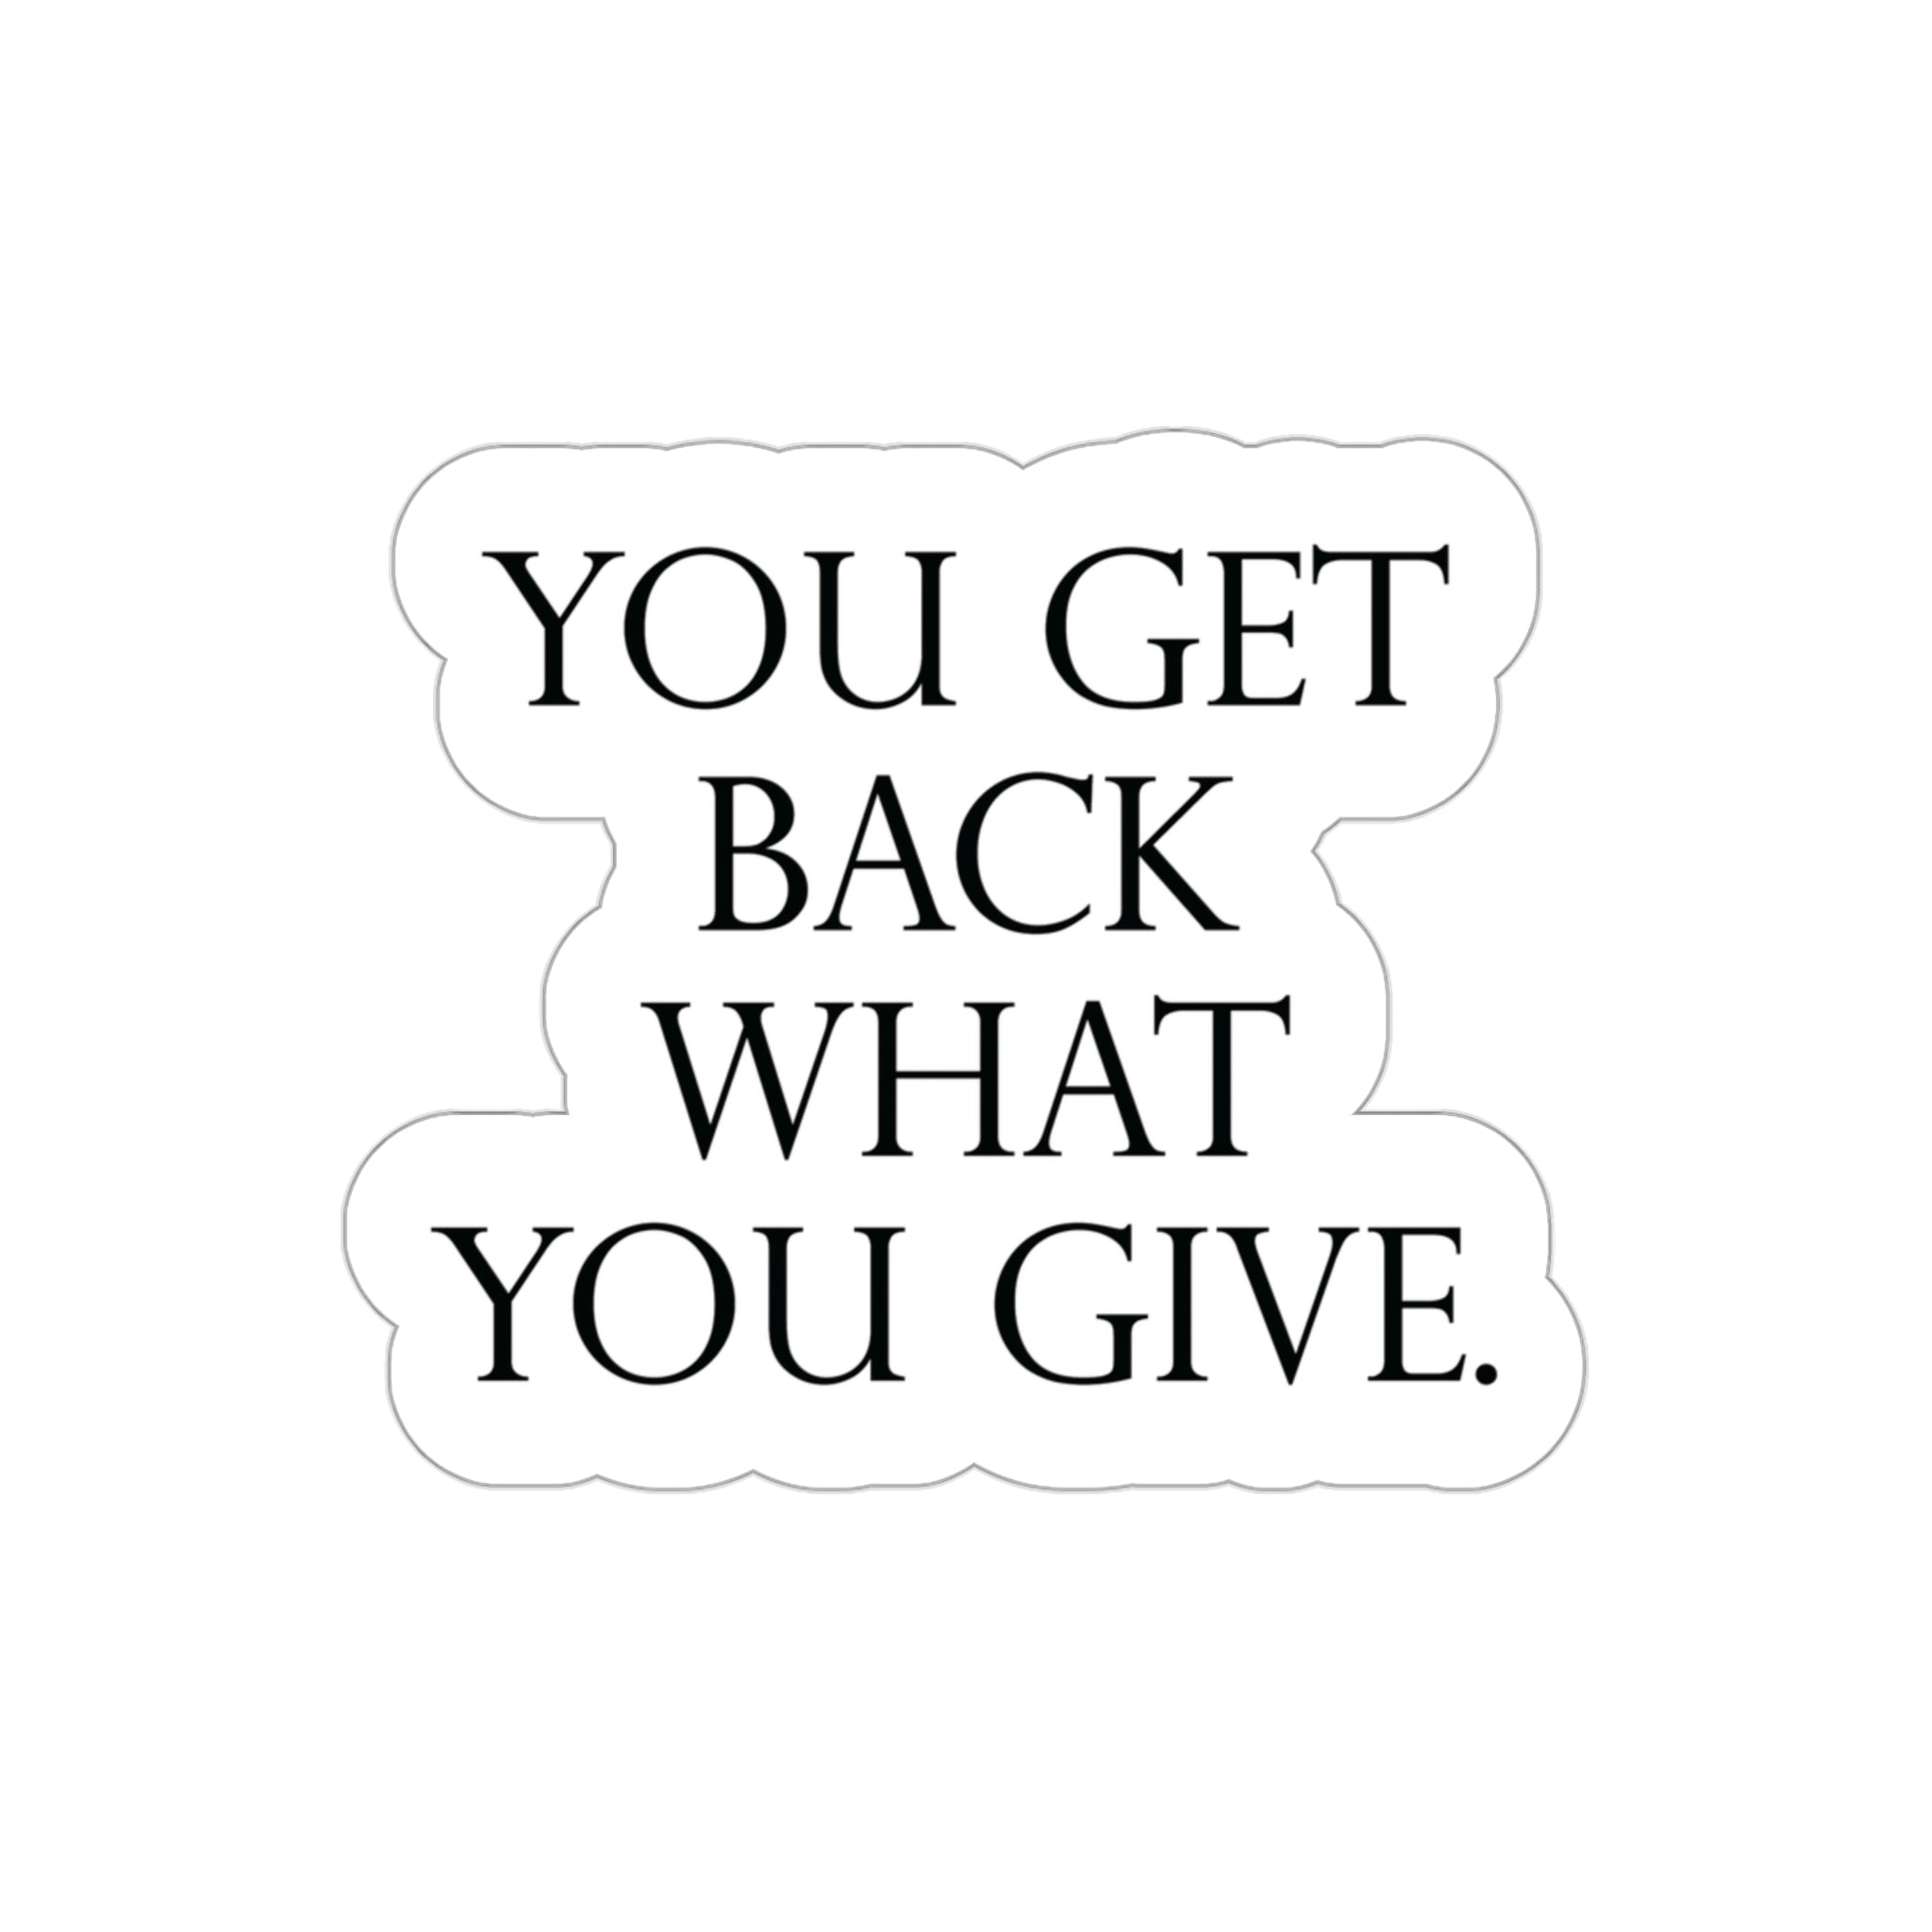 Be Kind & Generous - You Get Back What You Give! #size_3x3-inches